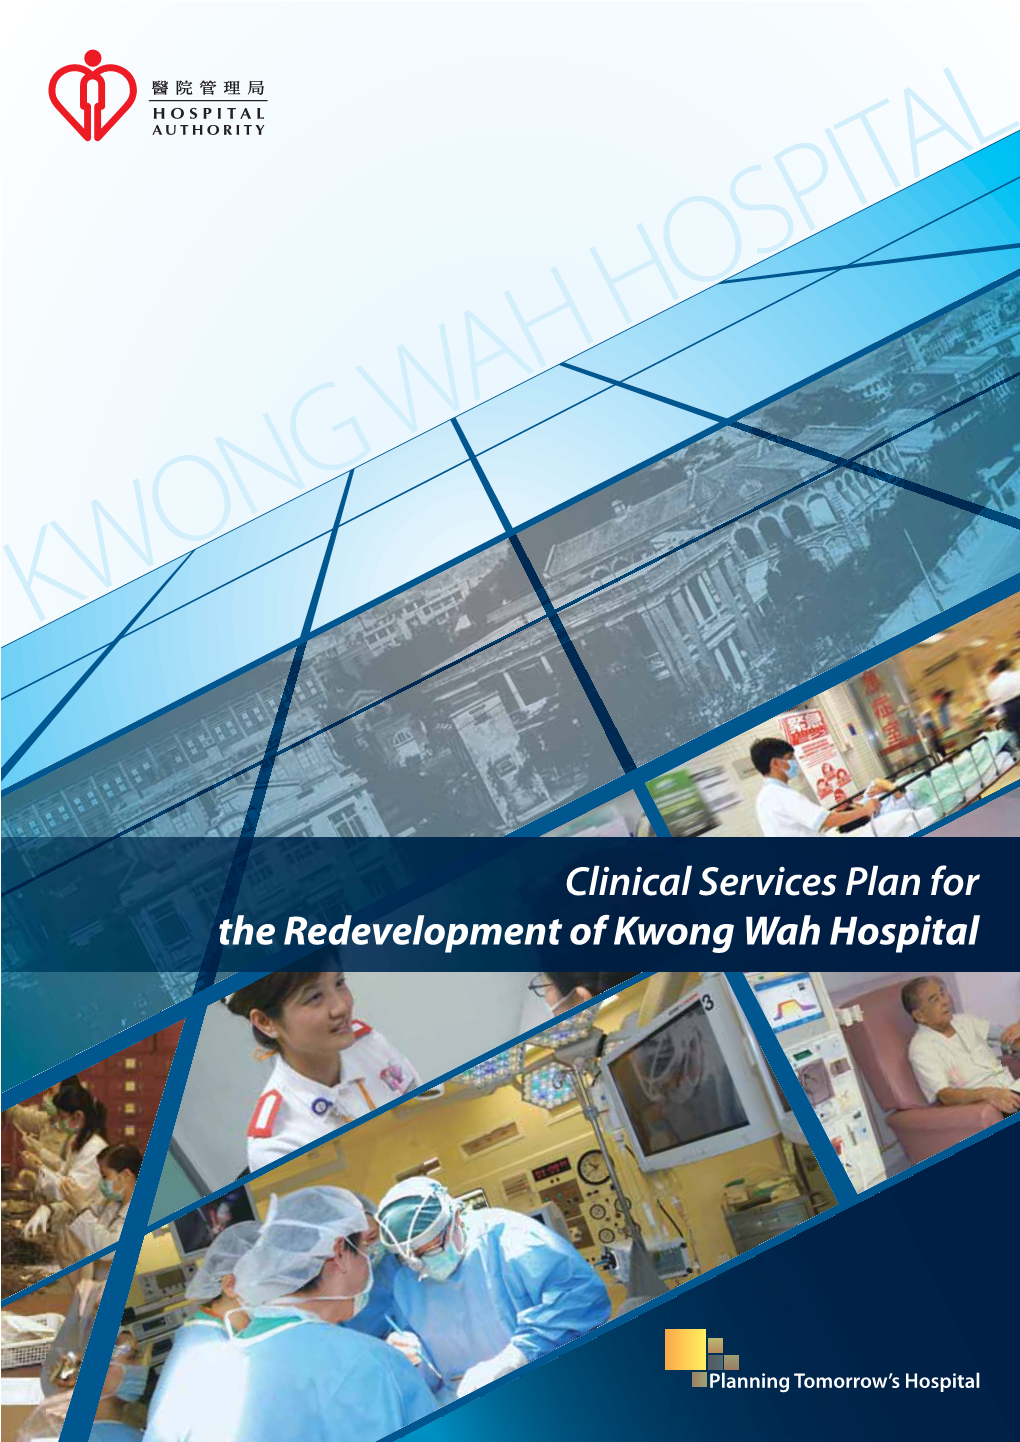 Clinical Services Plan for the Redevelopment of Kwong Wah Hospital